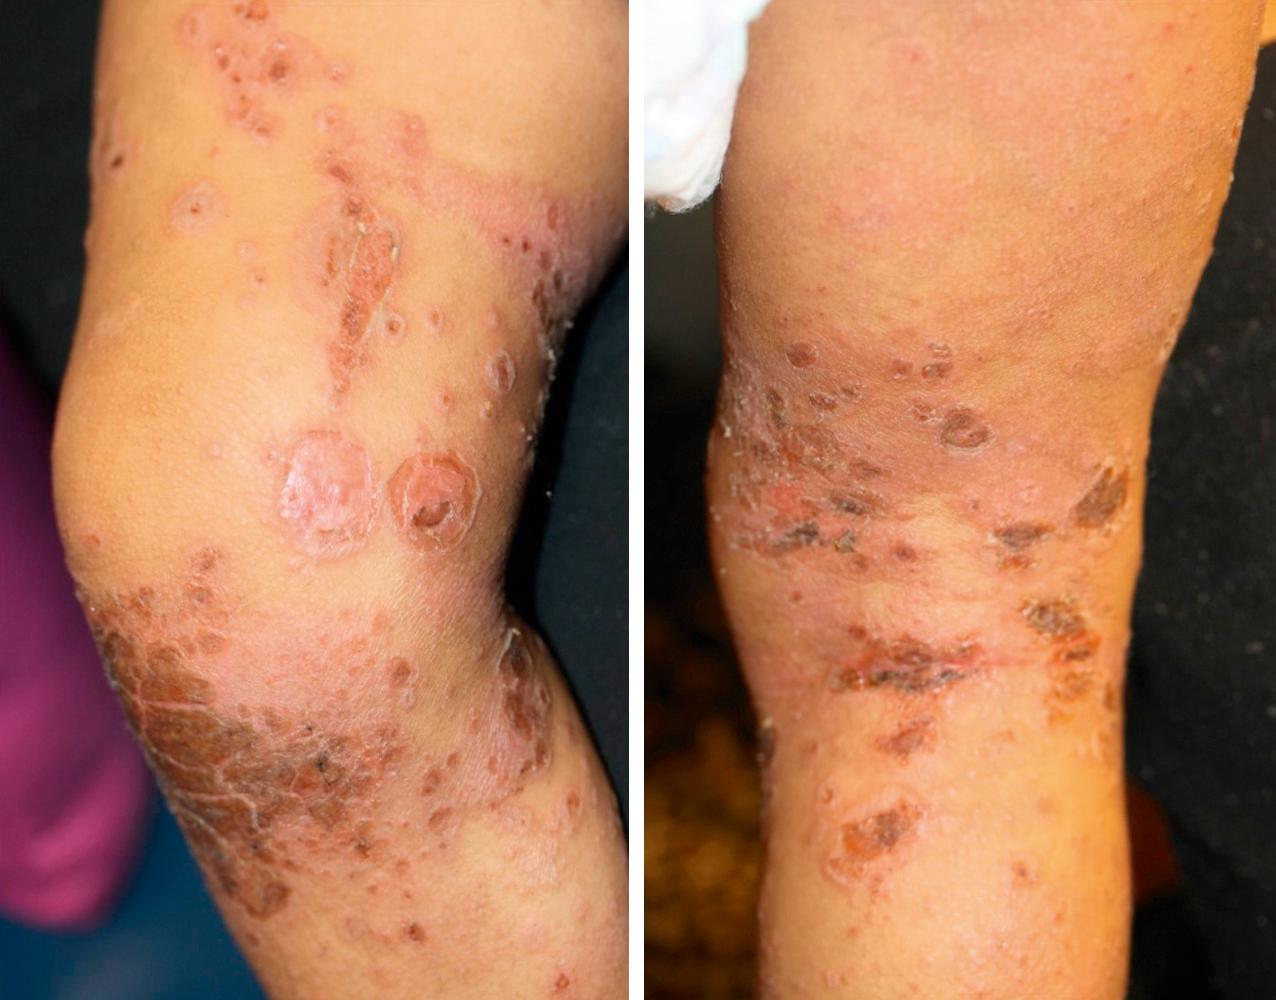 FIGURE 67.6, Scattered shallow erosions from ruptured vesicles and bullae, some with overlying crusting on the lower extremity of a child with eczema coxsackium (note the shallow nature of the erosions, unlike those seen in eczema herpeticum).